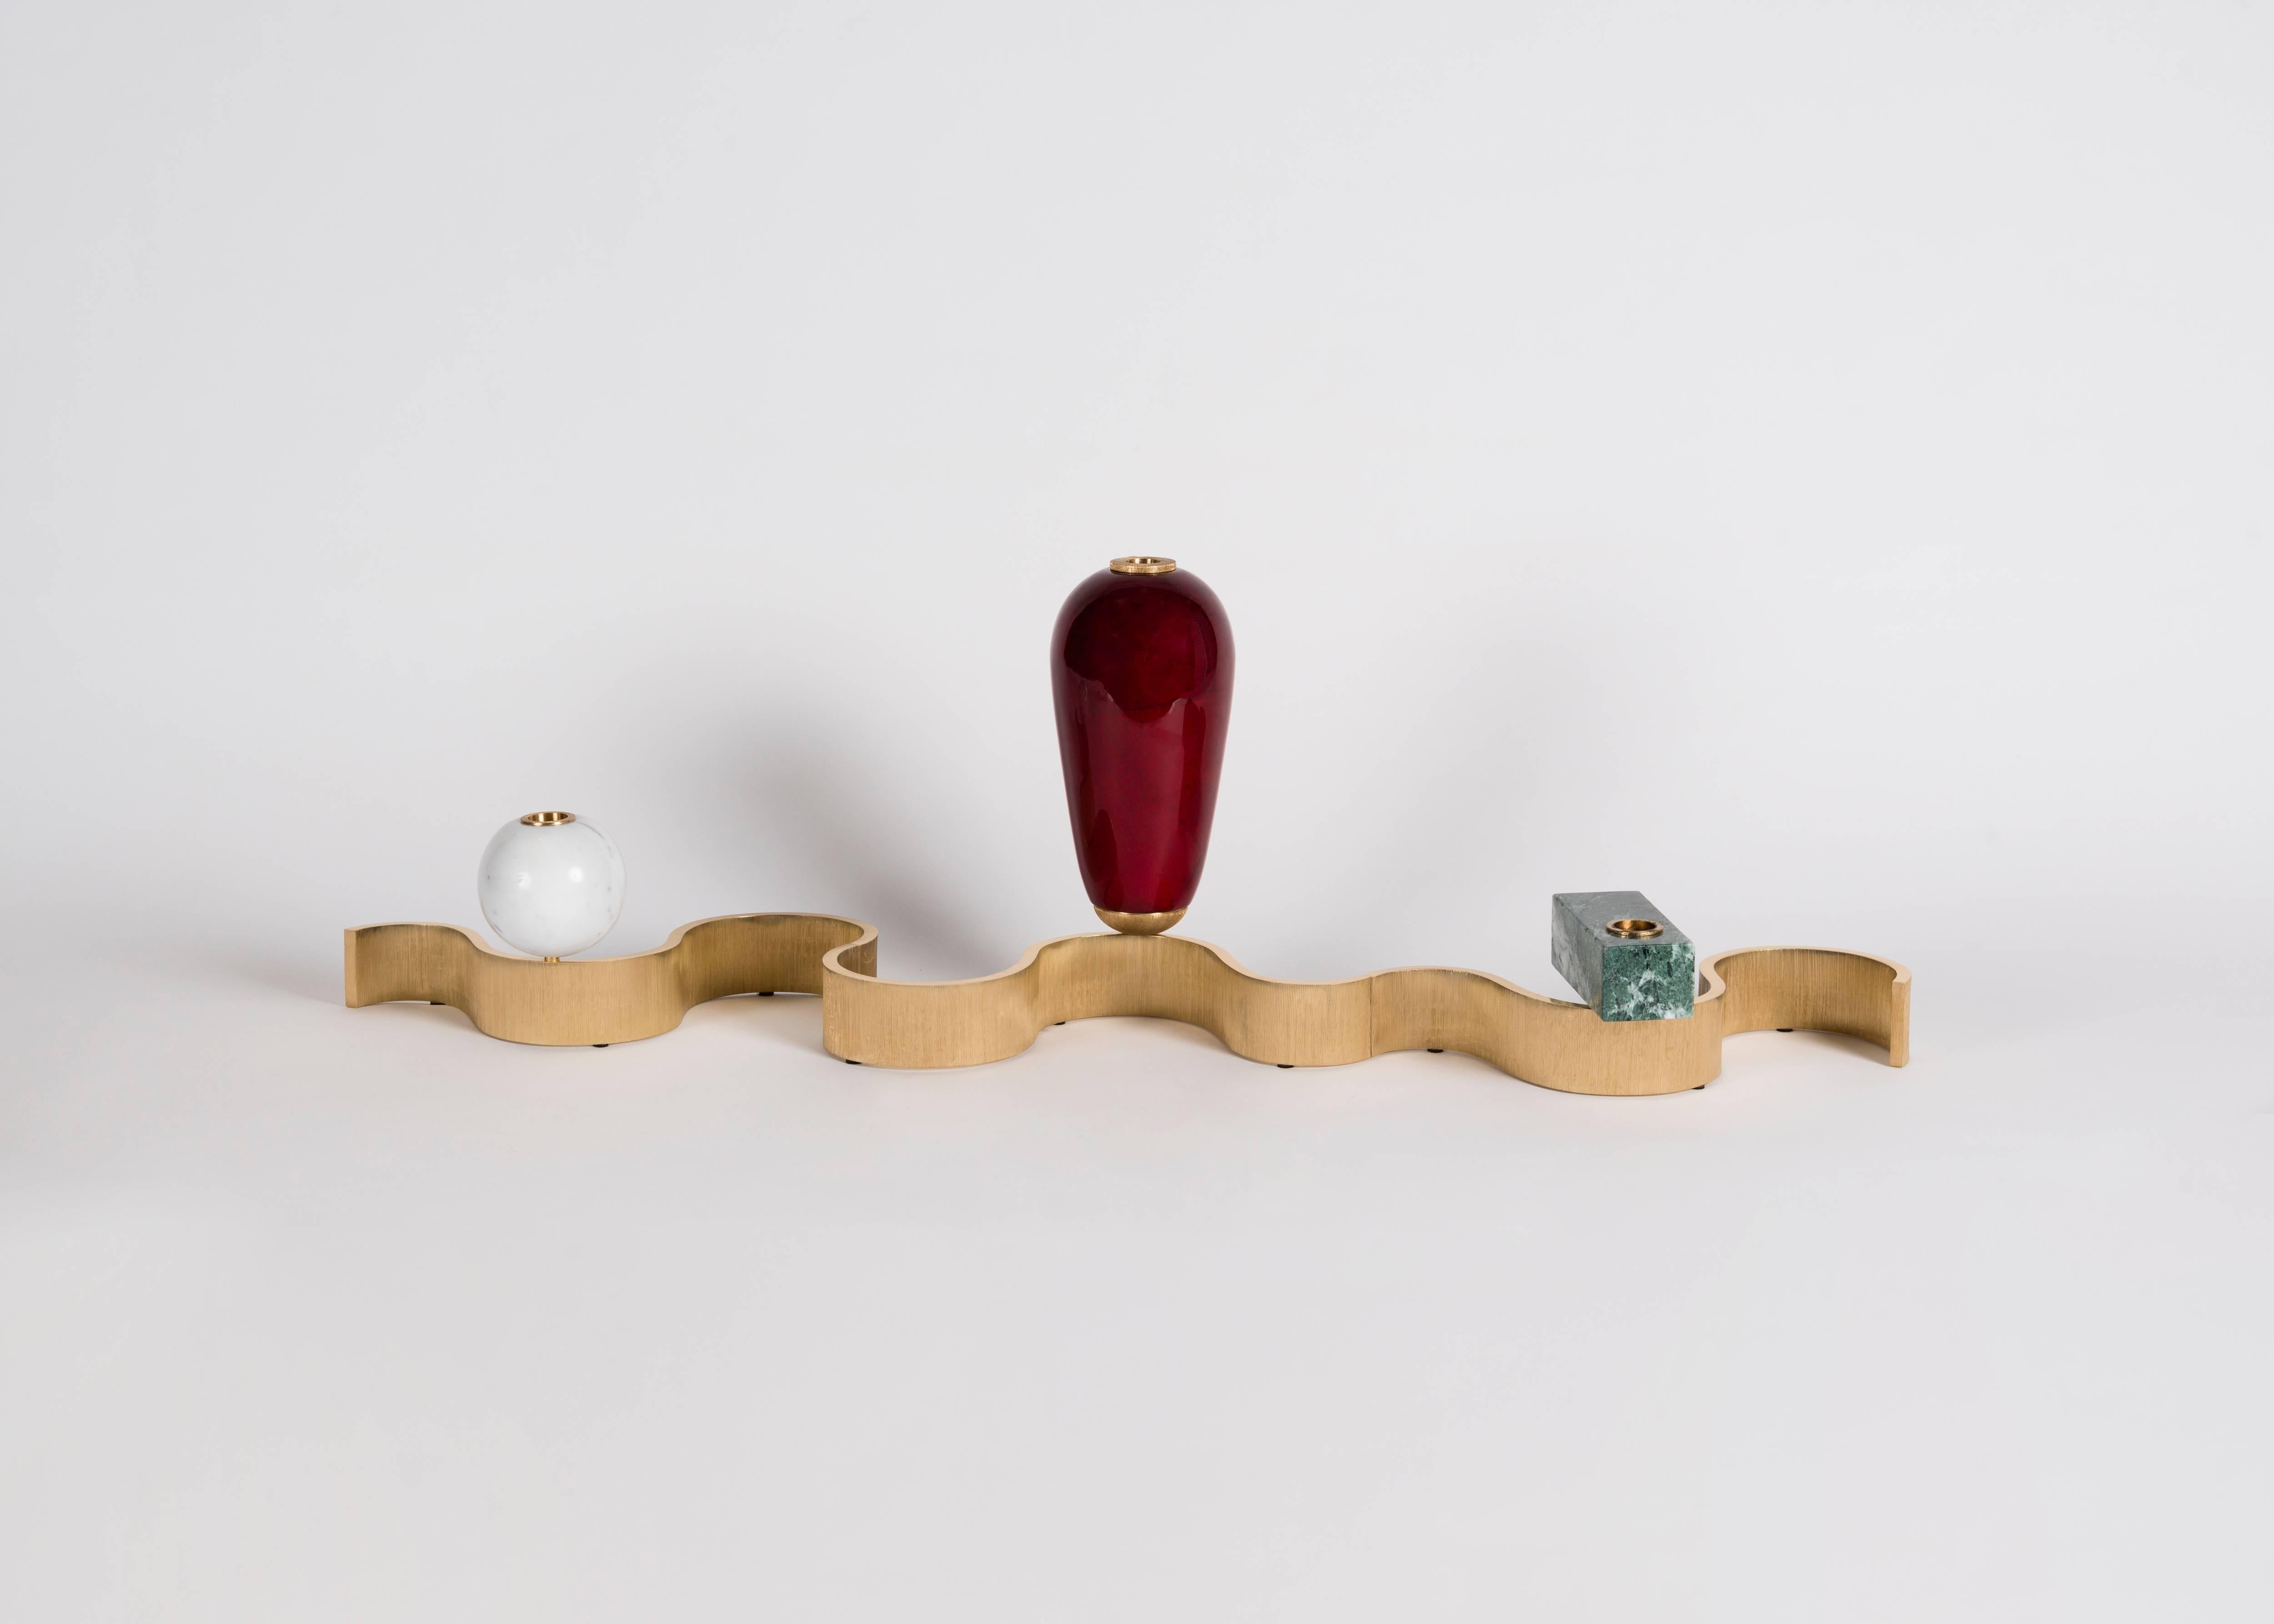 A centerpiece in three elements - one a parchment clad vase and the other two candlesticks of stone, all set upon connecting, serpentine cast brass bases. Edition of 20 pieces.

A collaboration between Achille Salvagni and Fabio Gnessi, Aldus aims